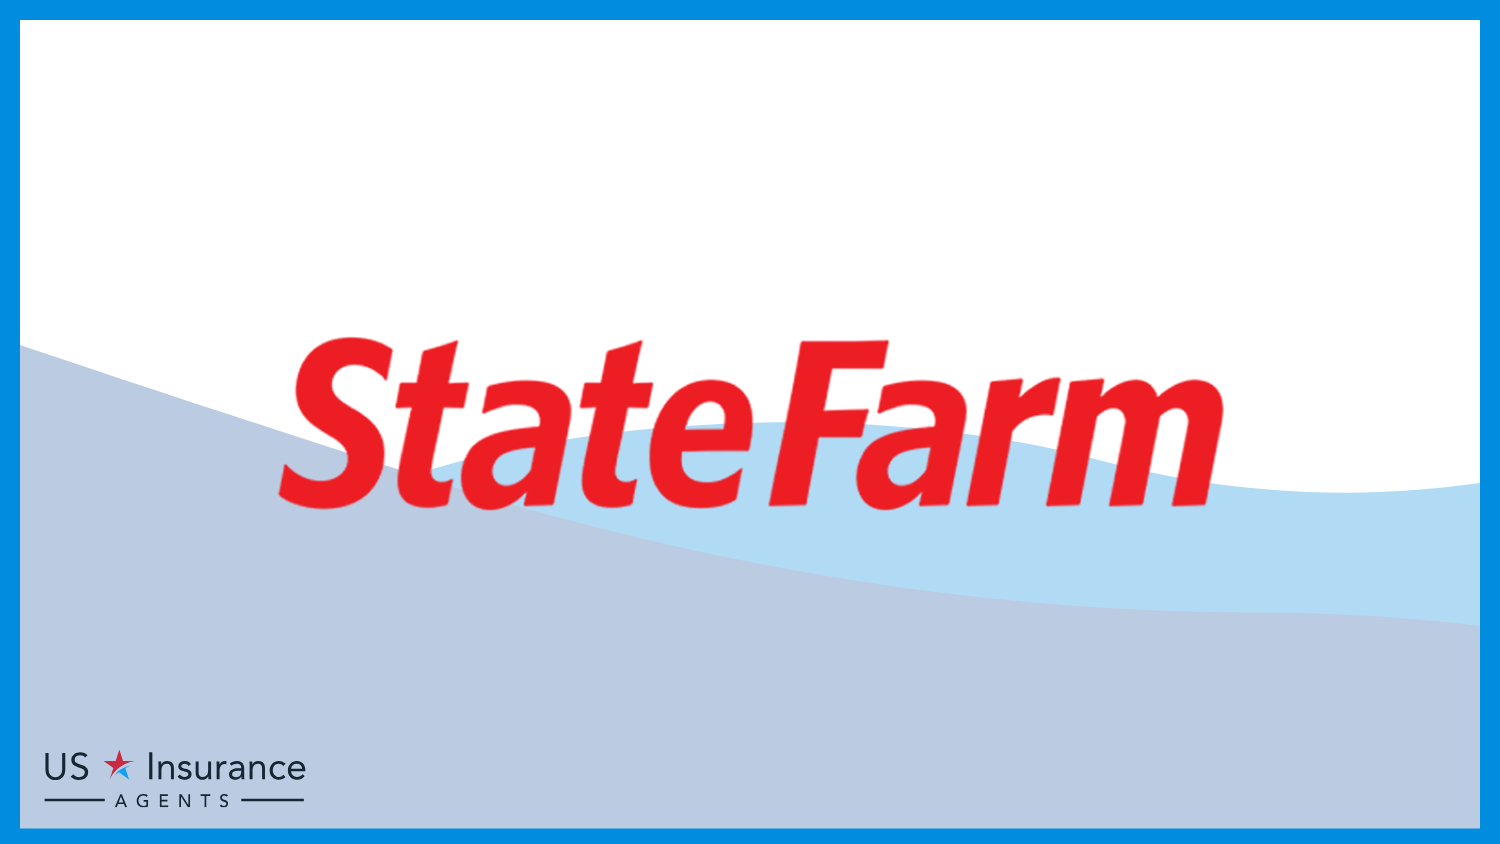 State Farm: Best Business Insurance for Beekeepers 